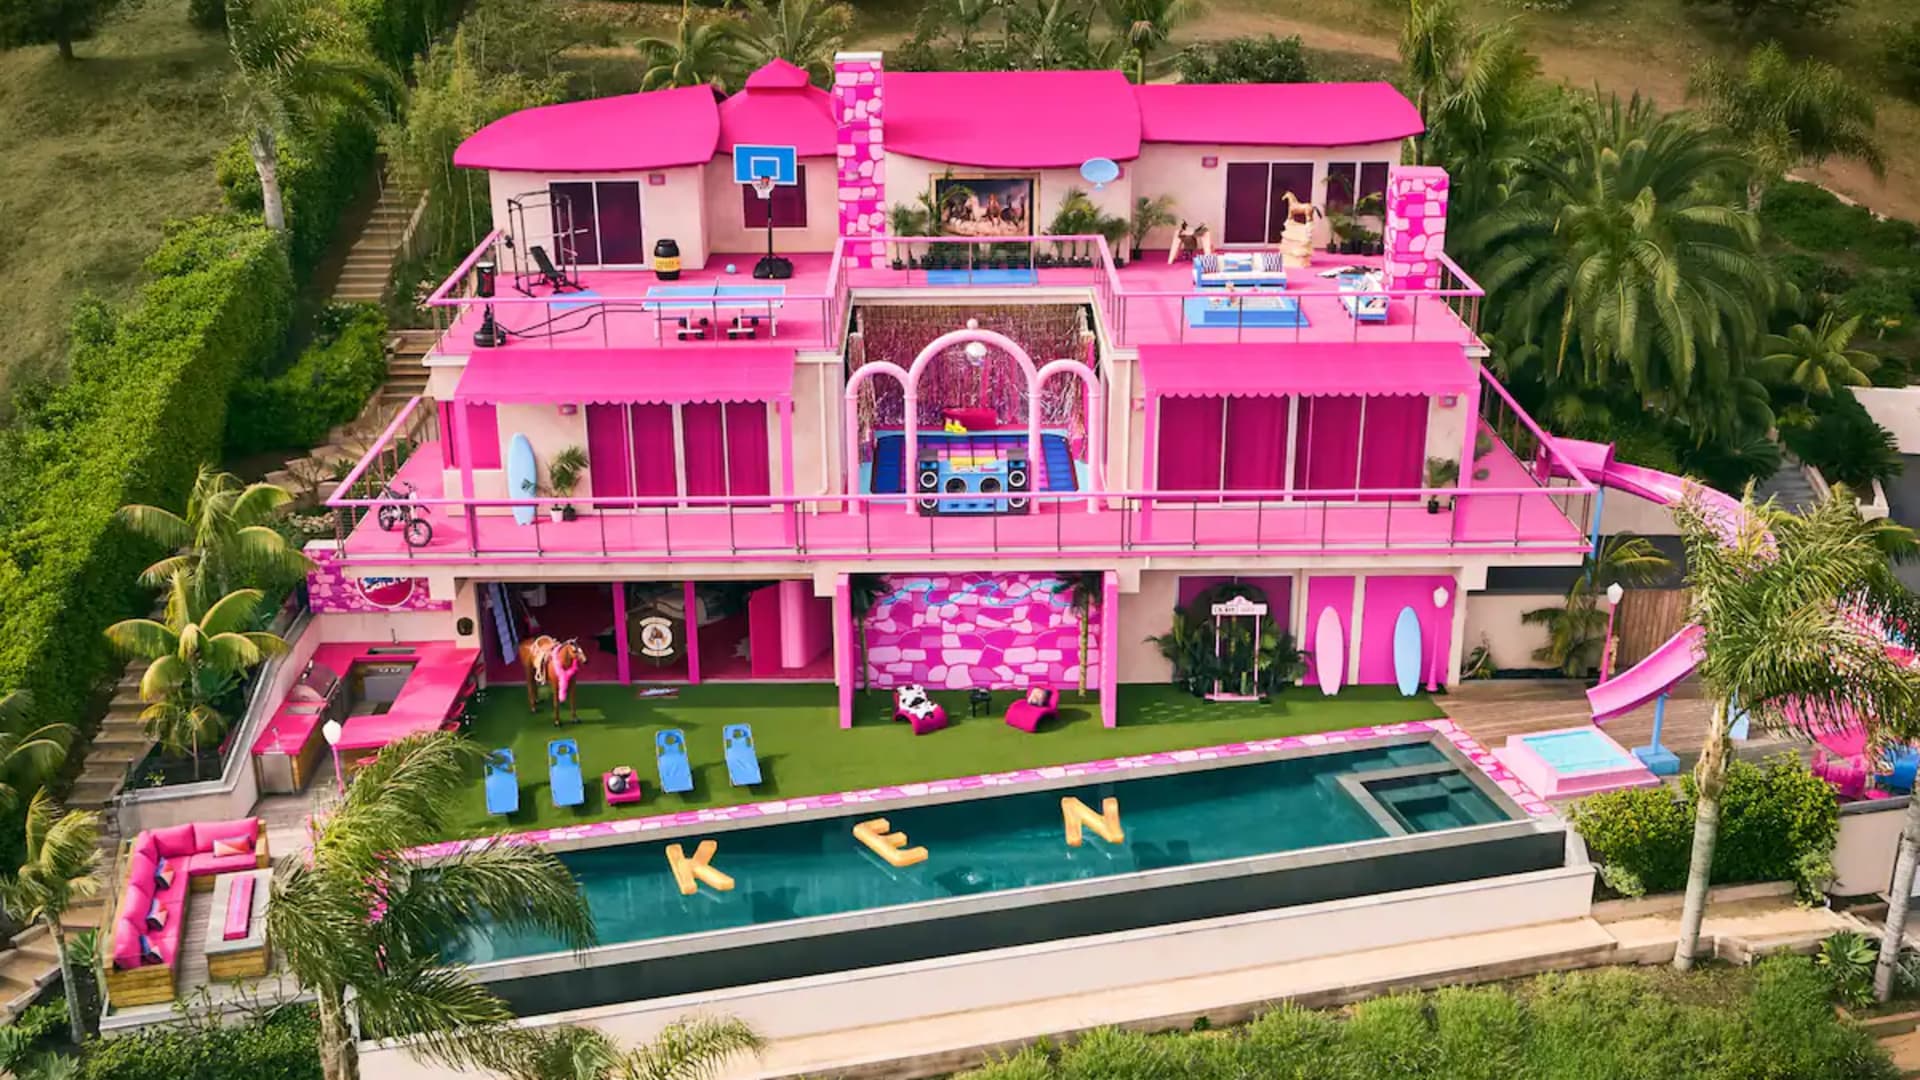 Airbnb is offering a free stay at Barbie's Malibu Dreamhouseâ€”here's how to book